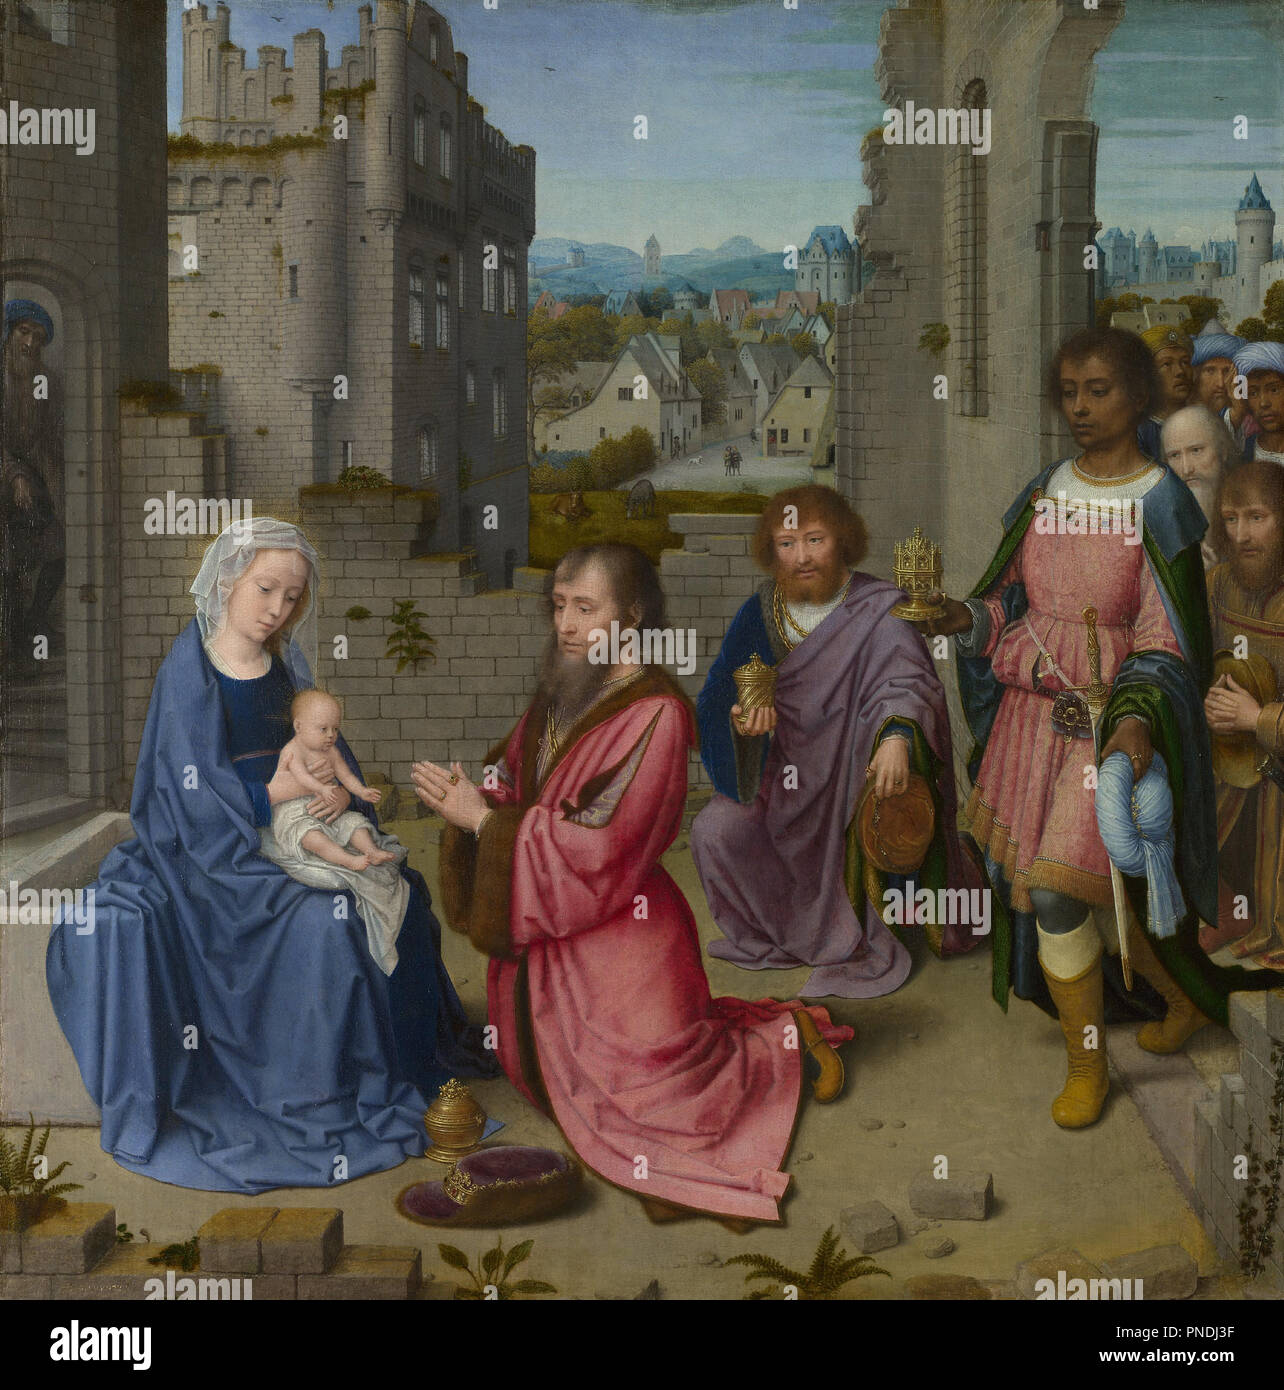 The Adoration of the Magi. Painting. Oil on oak. Height: 60 cm (23.6 in); Width: 59.2 cm (23.3 in). Author: Gerard David. DAVID, GERARD. Stock Photo